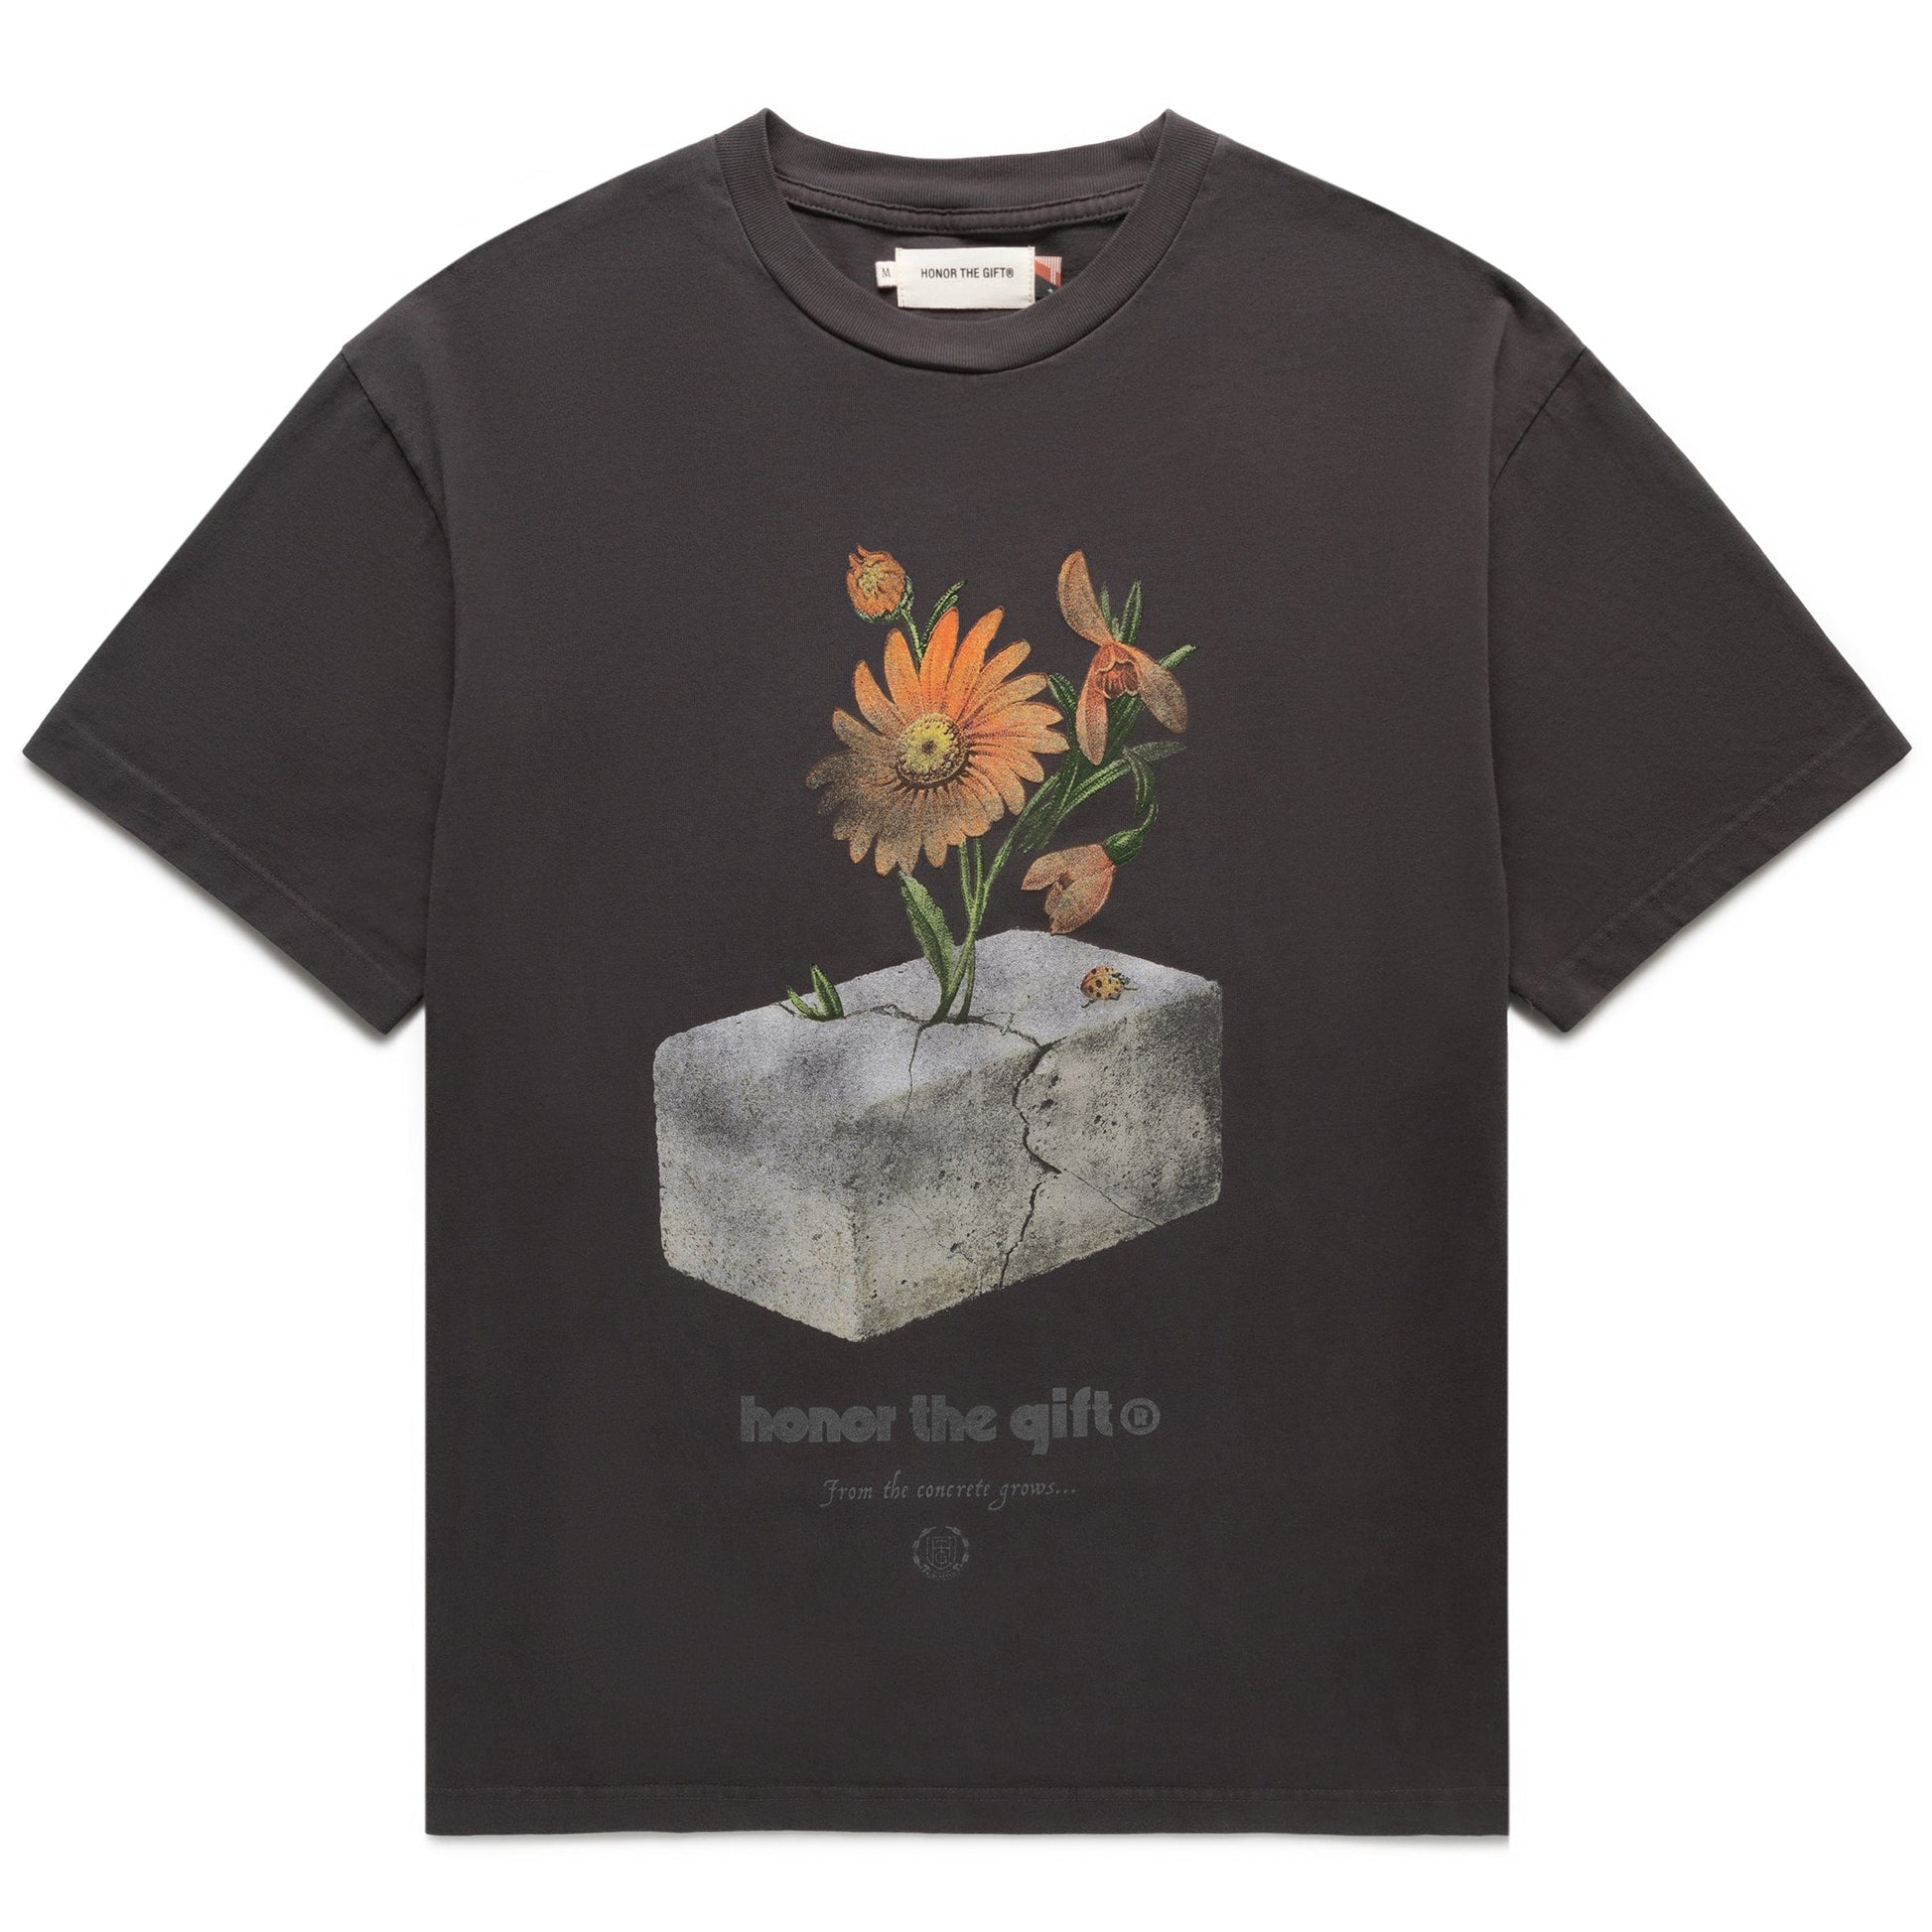 Honor The Gift T-Shirt D-HOLIDAY CONCRETE 2.0 T-SHIRT